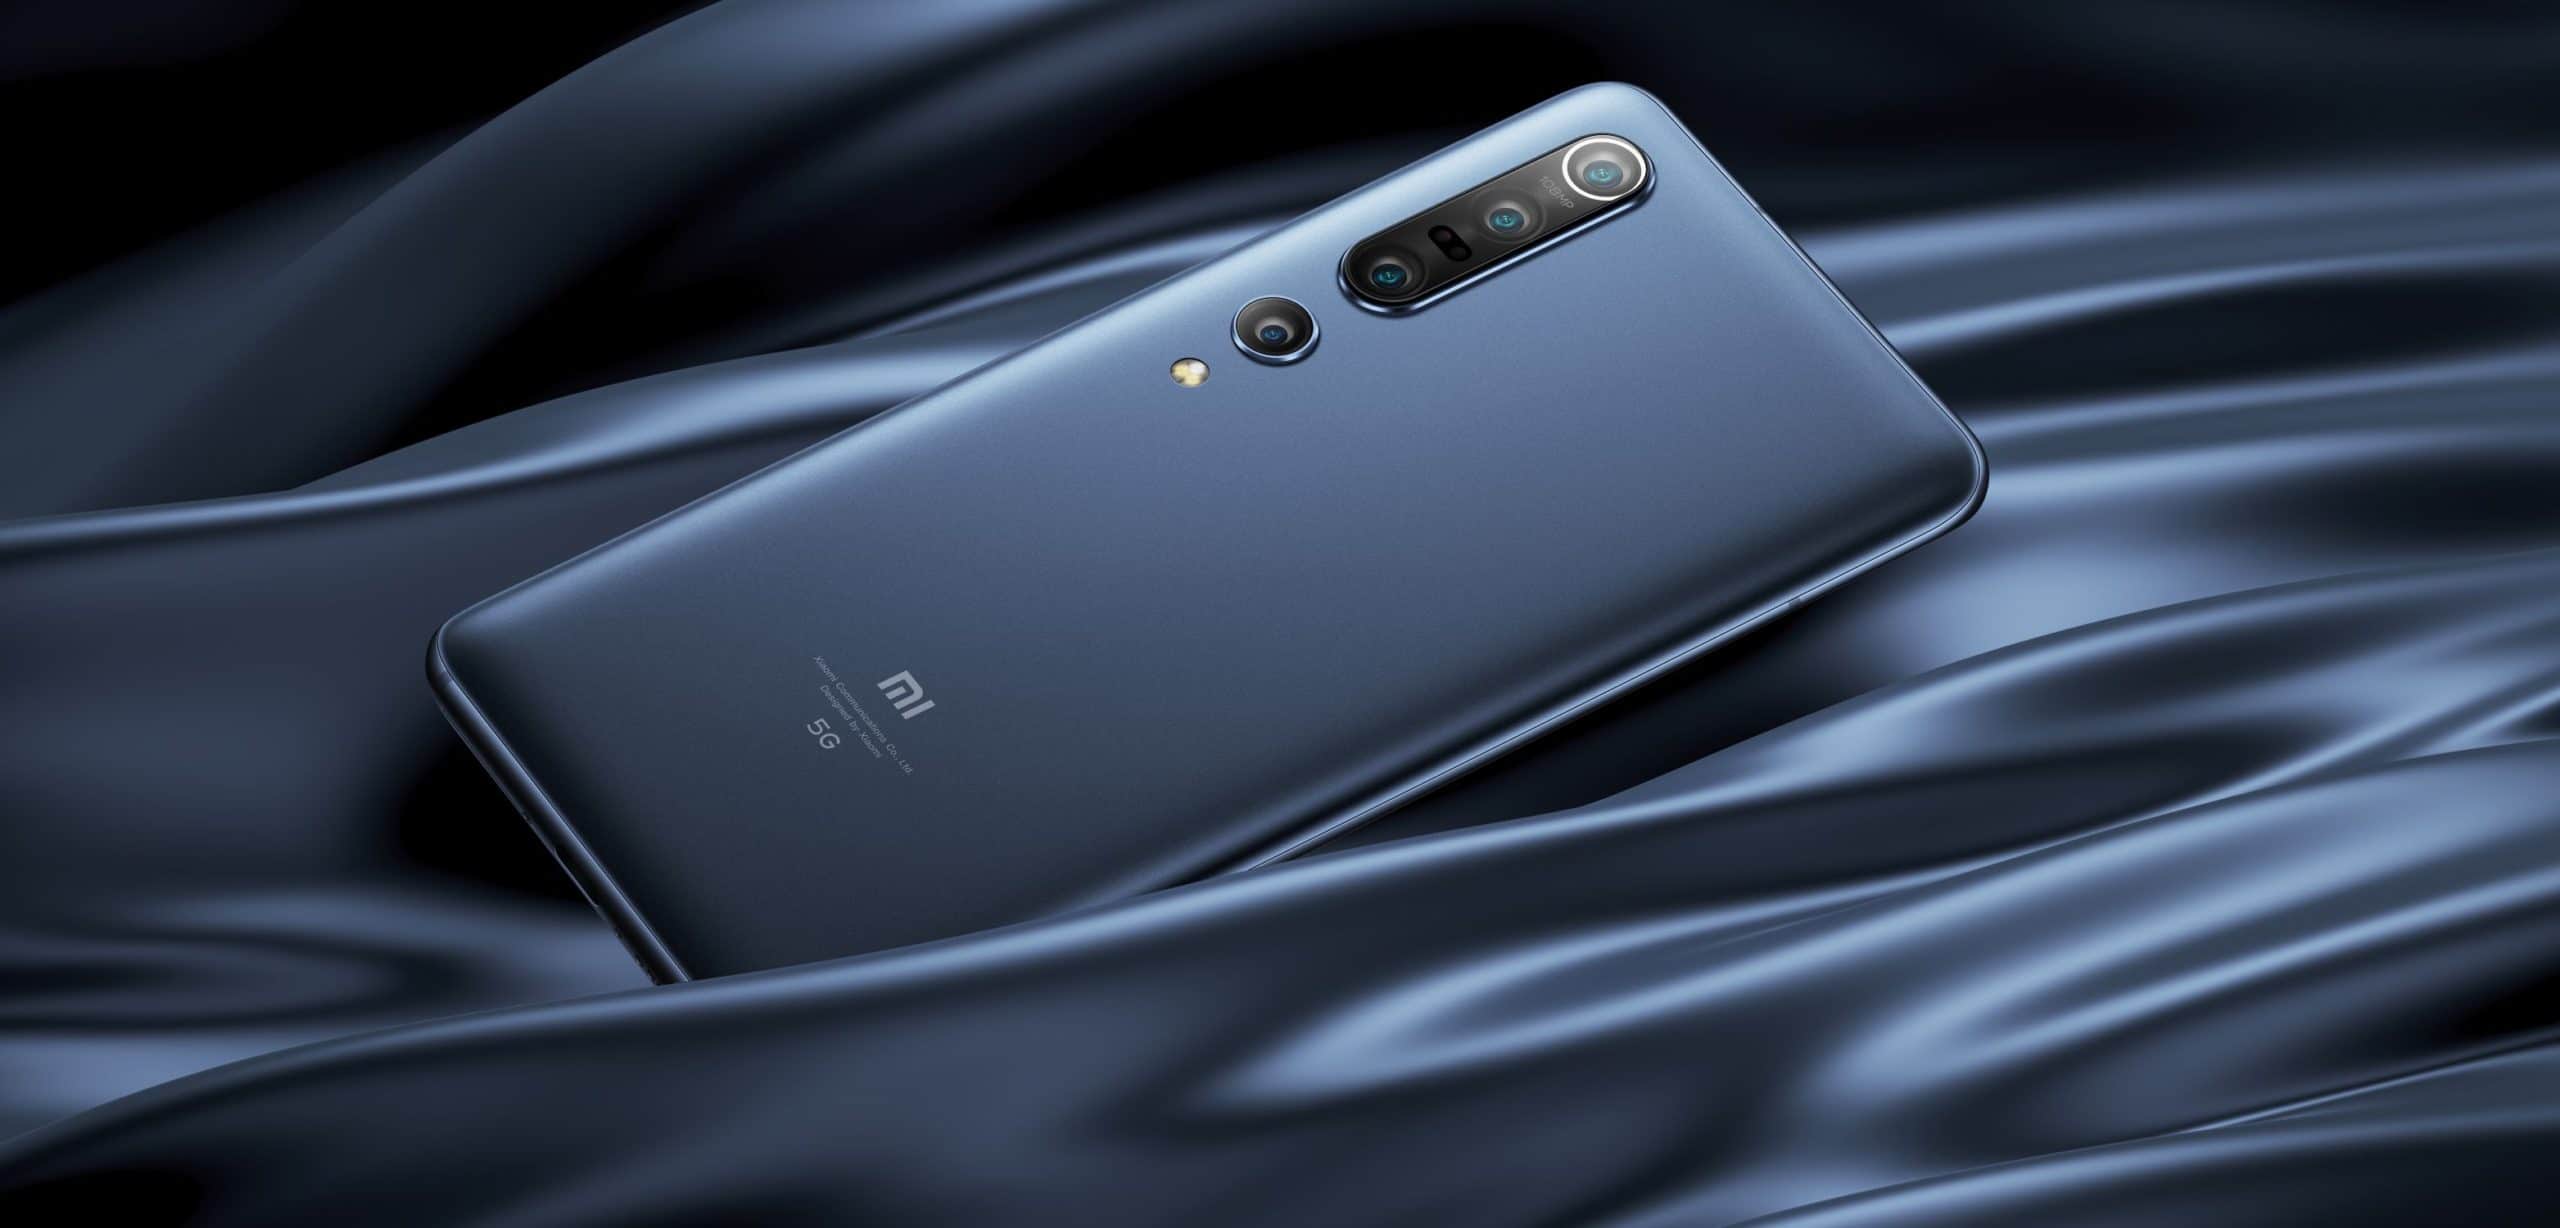 Xiaomi Mi 10, Mi 10 Pro and Mi 10 Lite 5G official in Italy: here are the prices